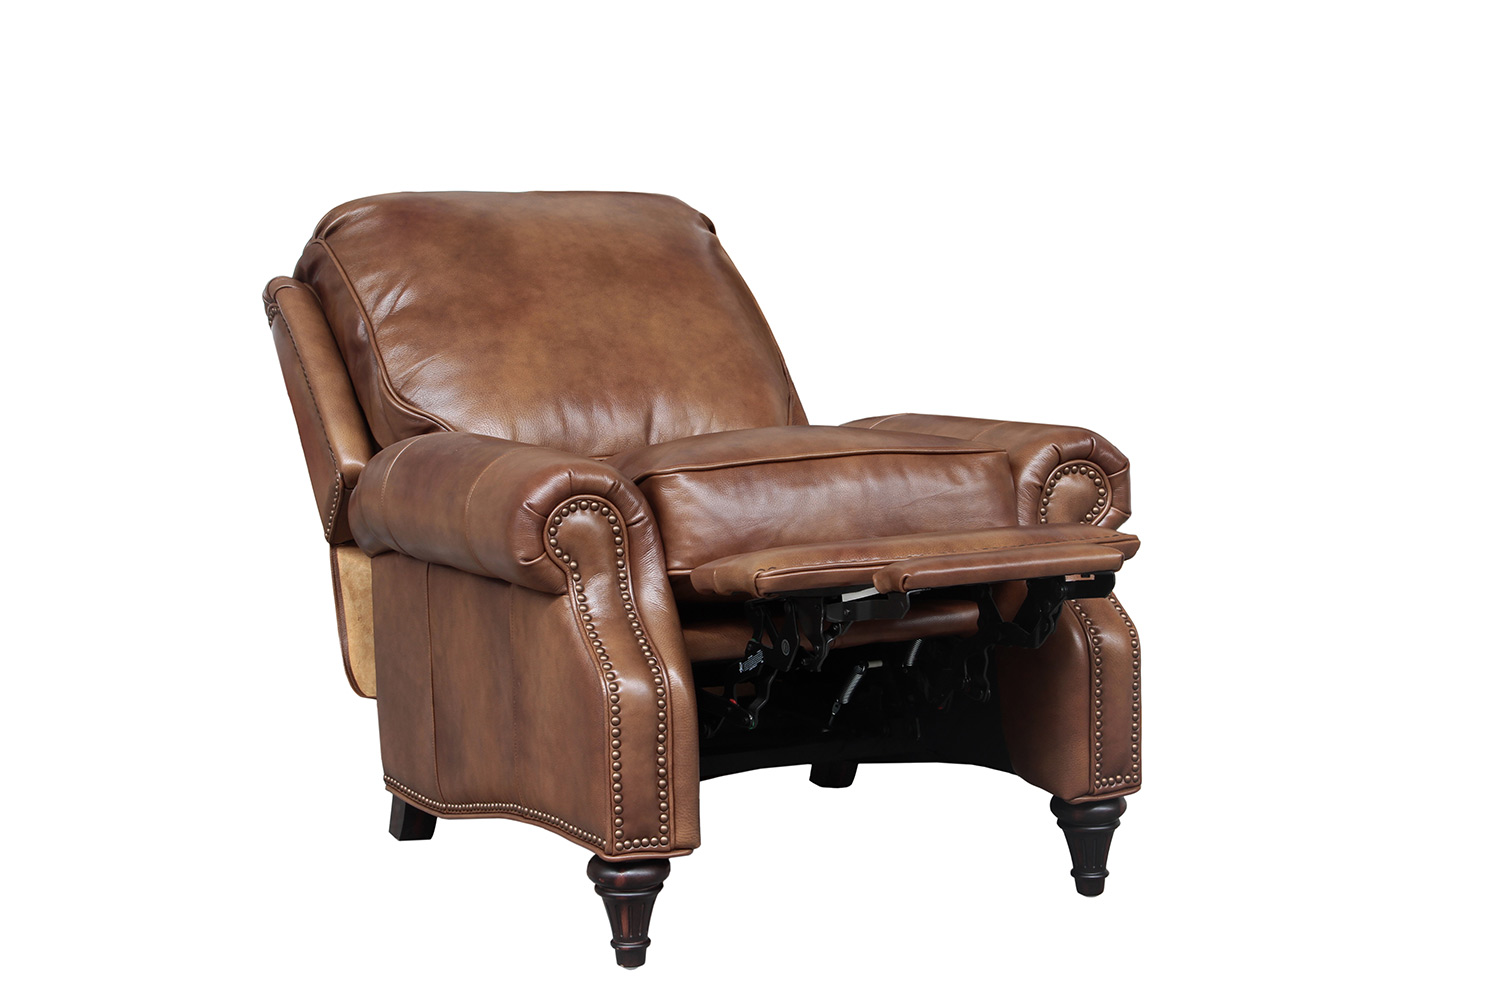 Barcalounger Avery Recliner Chair - Wenlock Tawny/All Leather